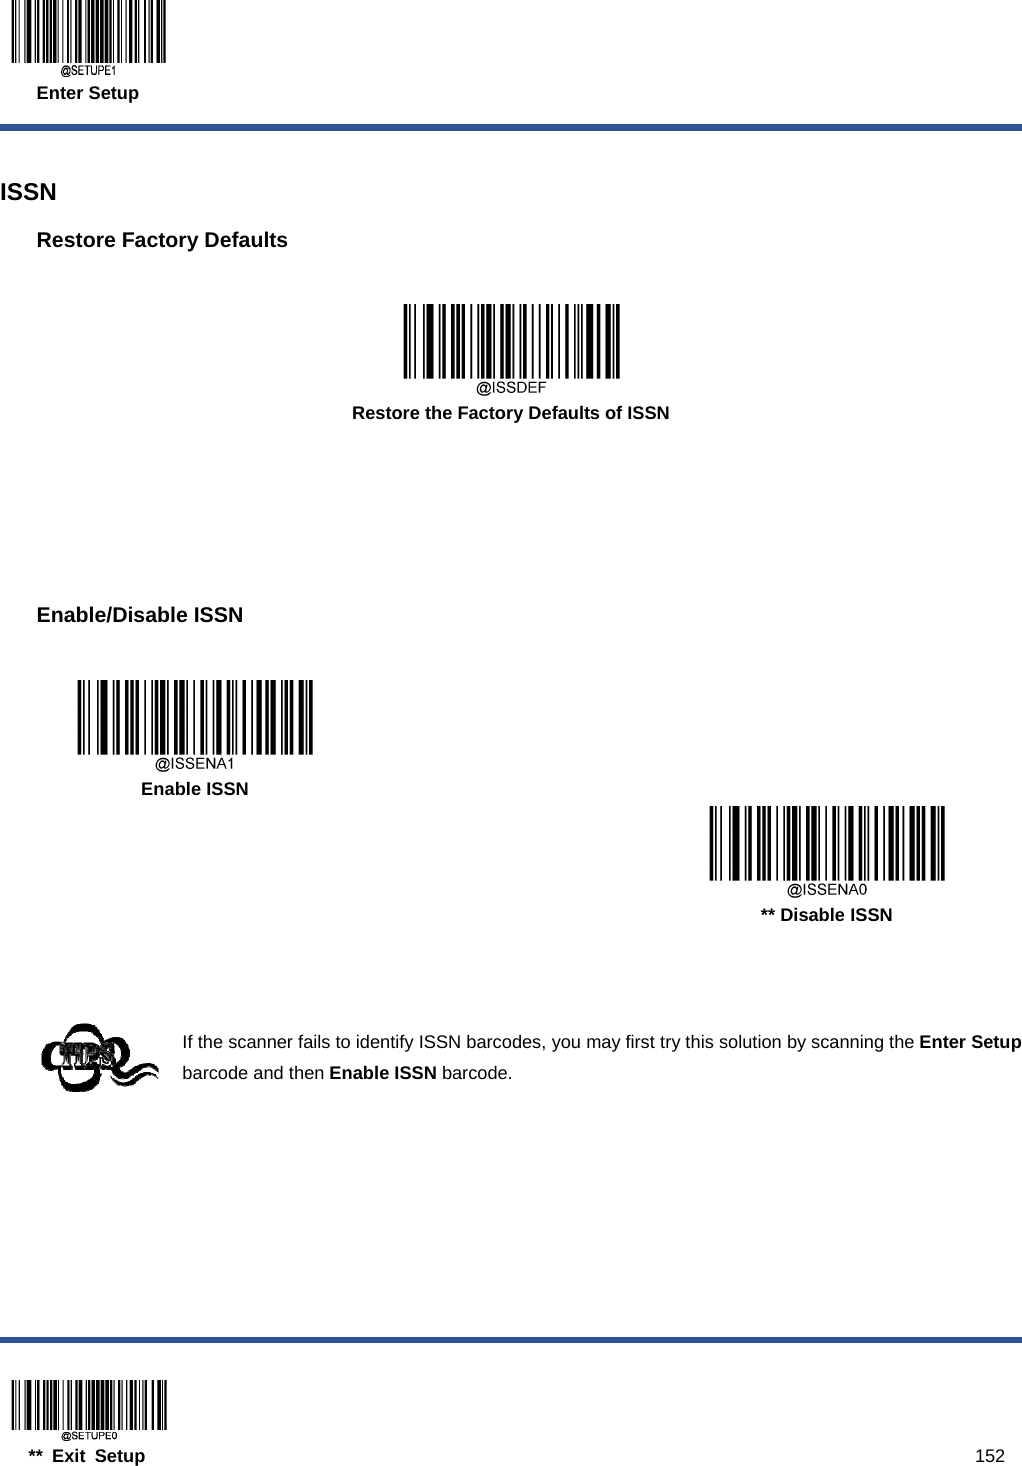  Enter Setup  ** Exit Setup                                                                                           152  ISSN Restore Factory Defaults   Restore the Factory Defaults of ISSN      Enable/Disable ISSN     Enable ISSN      ** Disable ISSN    If the scanner fails to identify ISSN barcodes, you may first try this solution by scanning the Enter Setup barcode and then Enable ISSN barcode.  